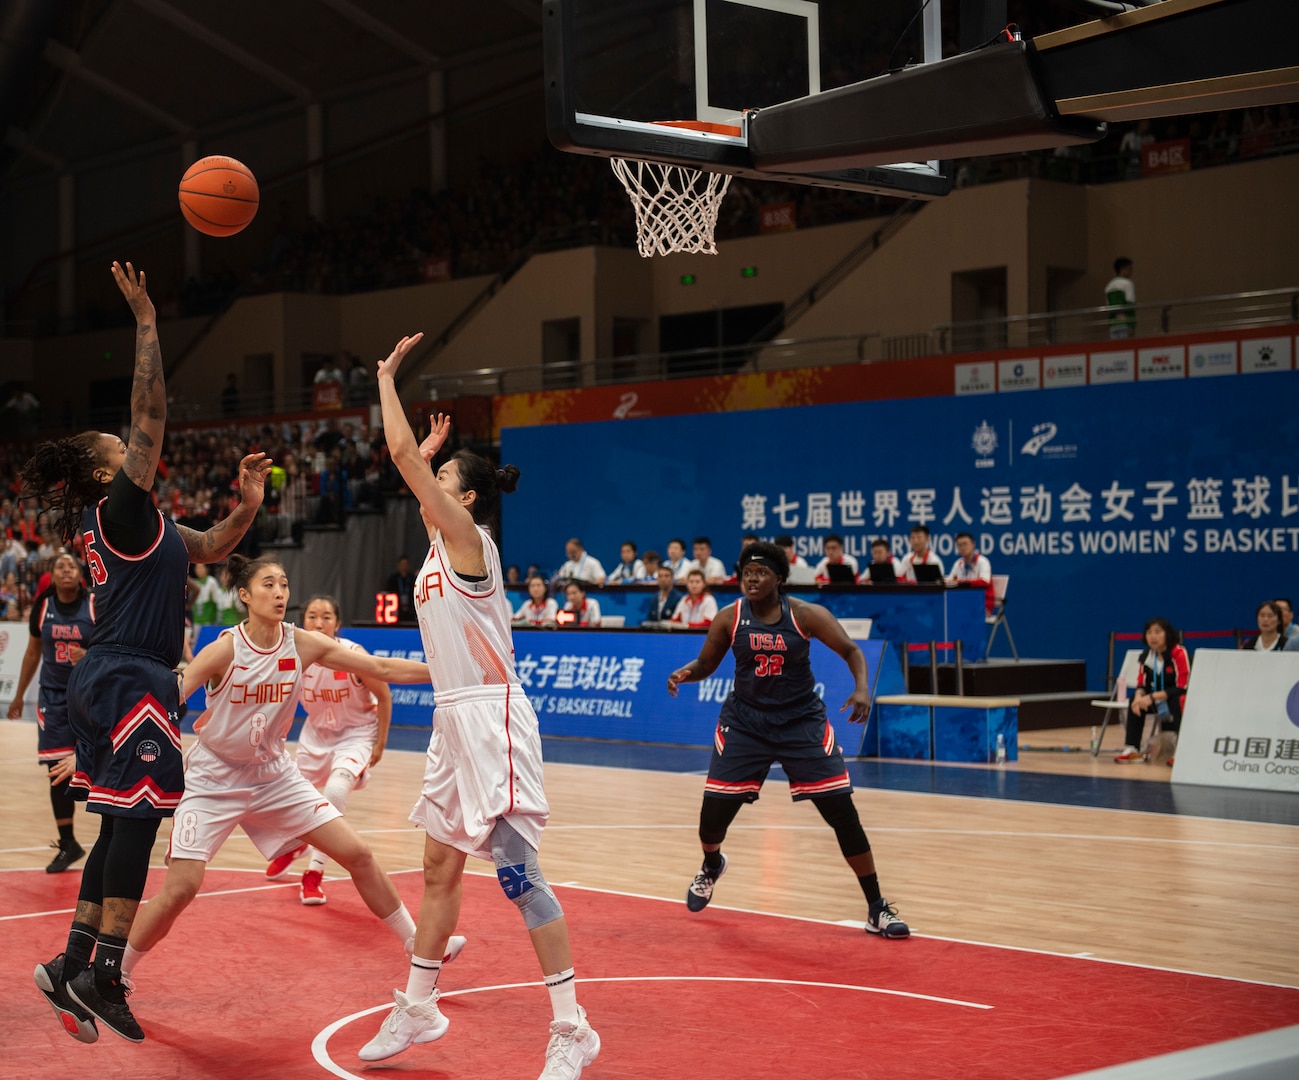 U.S. Navy Petty Officer 2nd Class Ariel Thomas, United States Armed Forces Military World Games Women’s Basketball player, shoots a basket over a Chinese defender during the Conseil International du Sport Militaire Women’s Basketball Competion in Wuhan China, Oct. 22, 2019. The 7th MWG will feature military athletes from around the world with an estimated participation of more than 100 nations and more than 10,000 participants. (U.S. Air Force photo by Staff Sergeant James R. Crow)